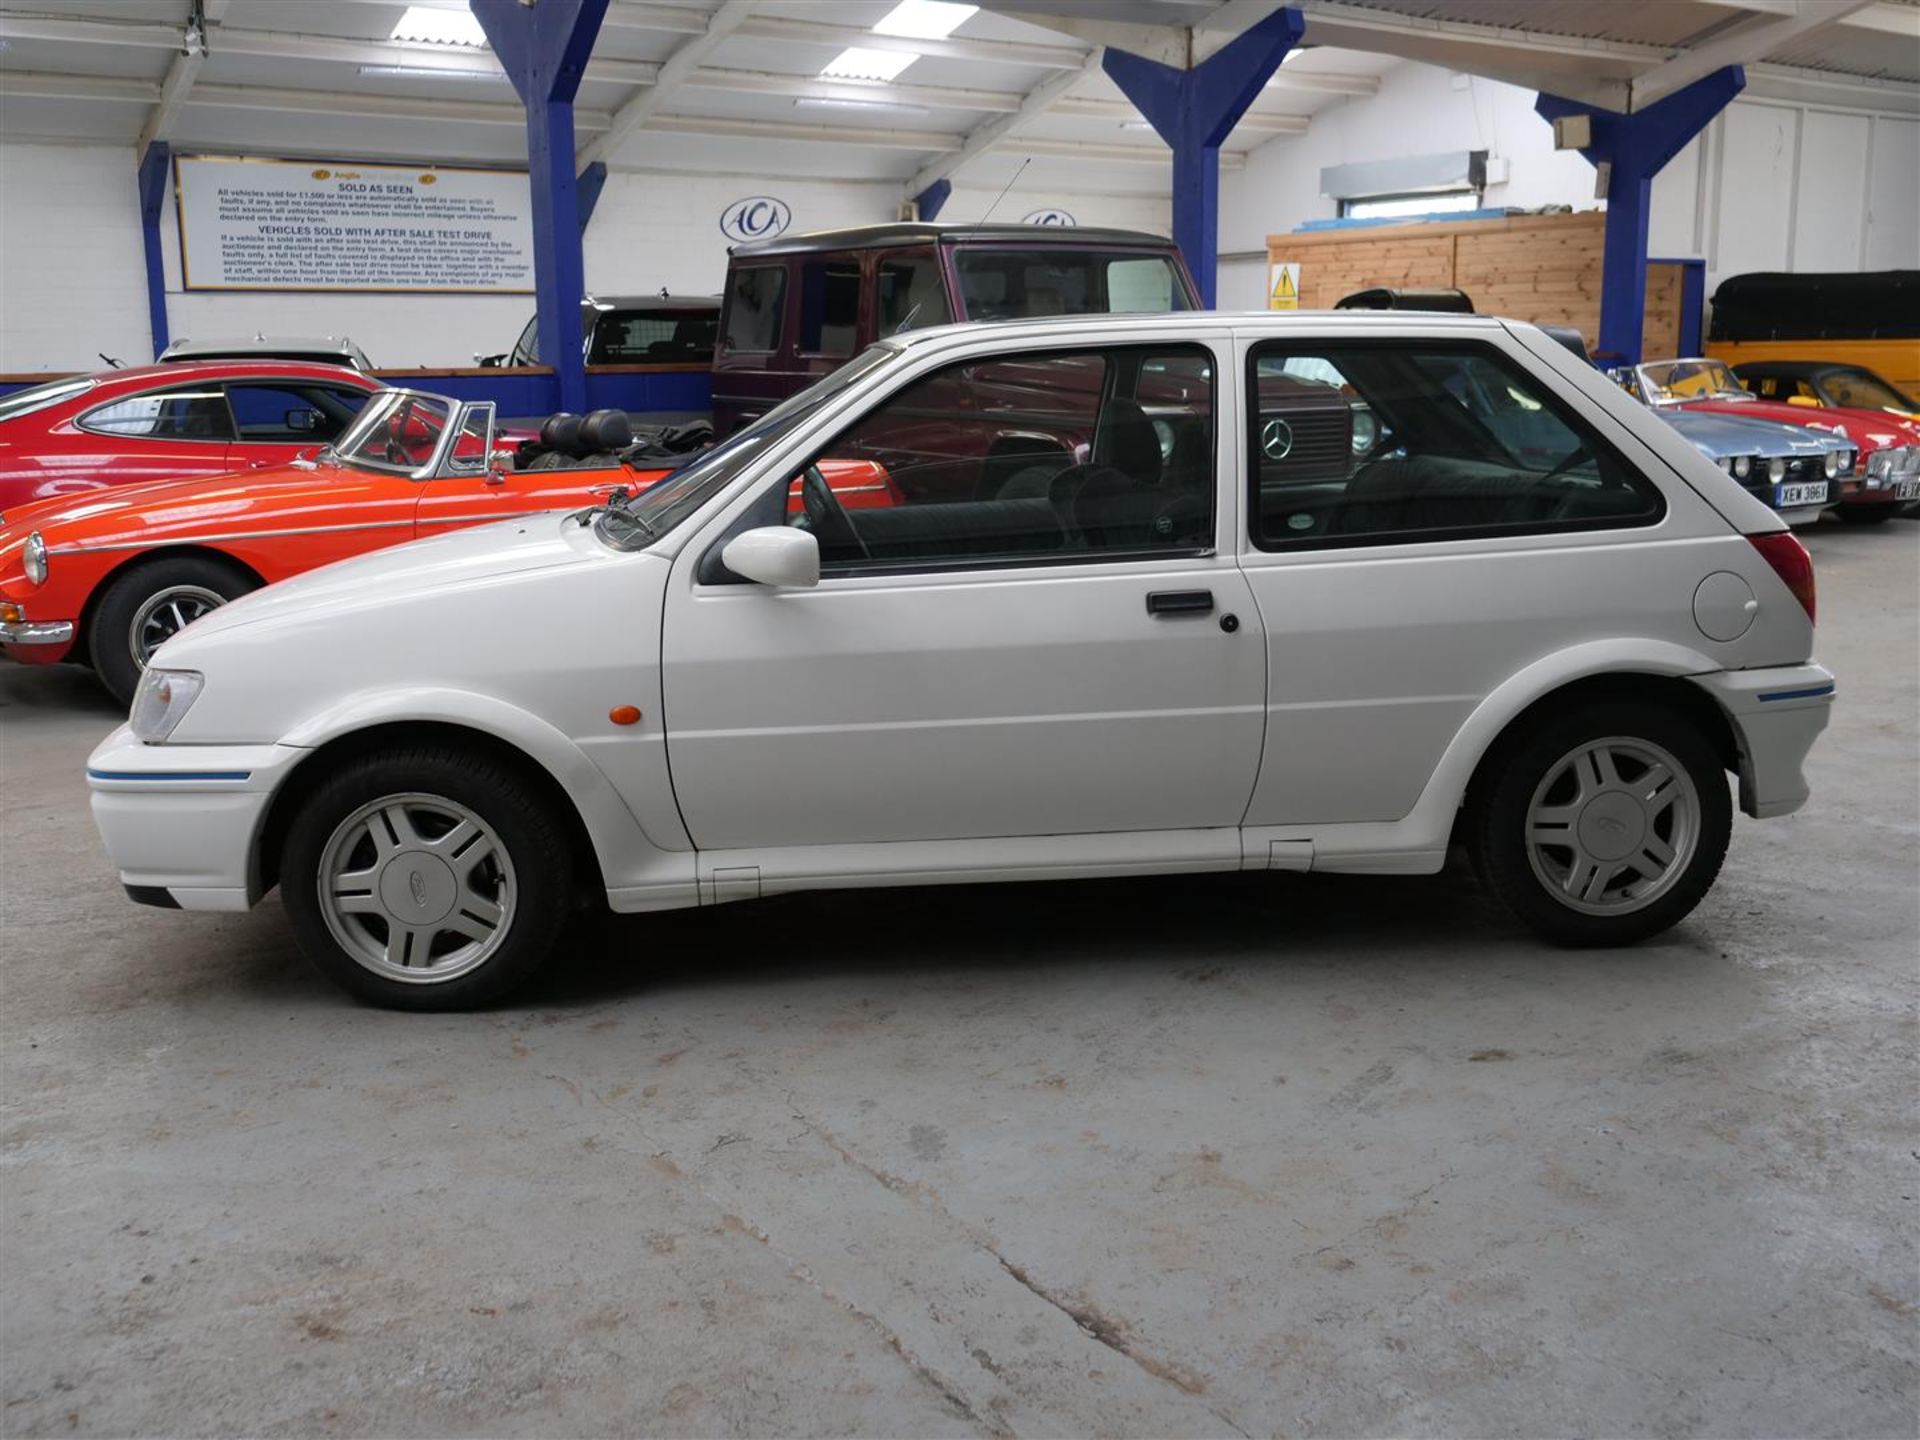 1994 Ford Fiesta RS1800 - Image 8 of 30